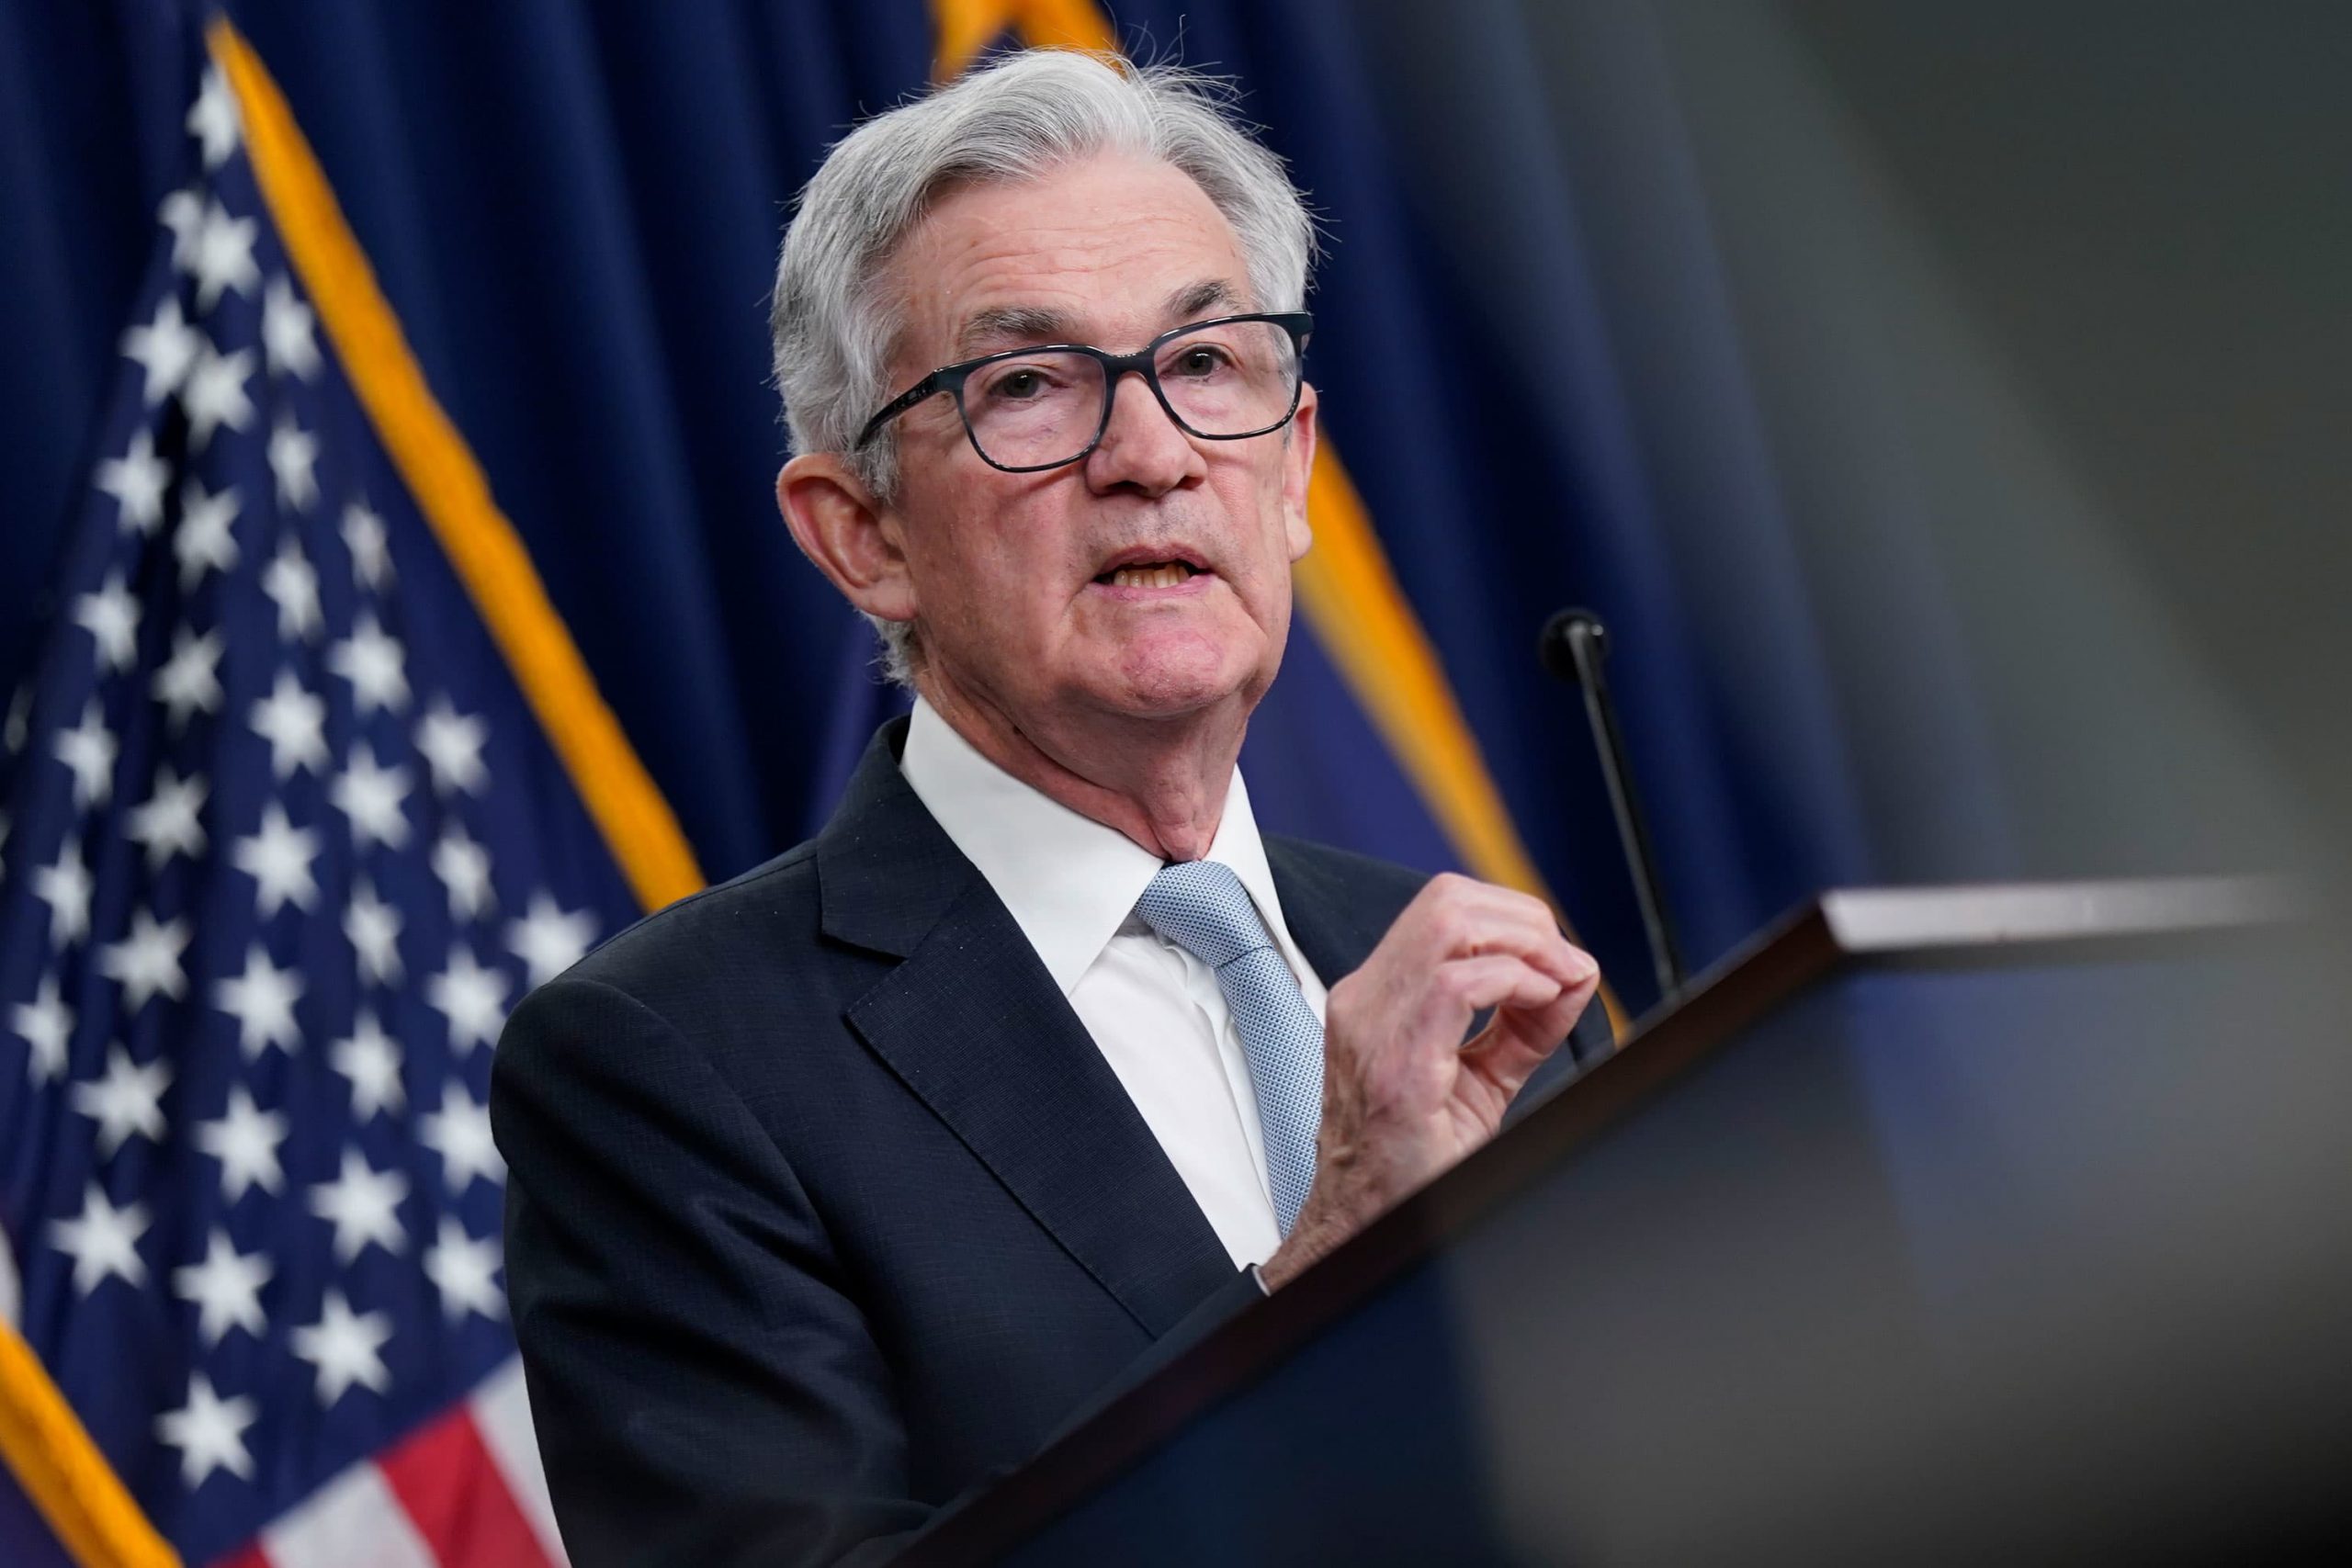 WATCH: Federal Reserve Chair Jerome Powell speaks on latest interest rate hike